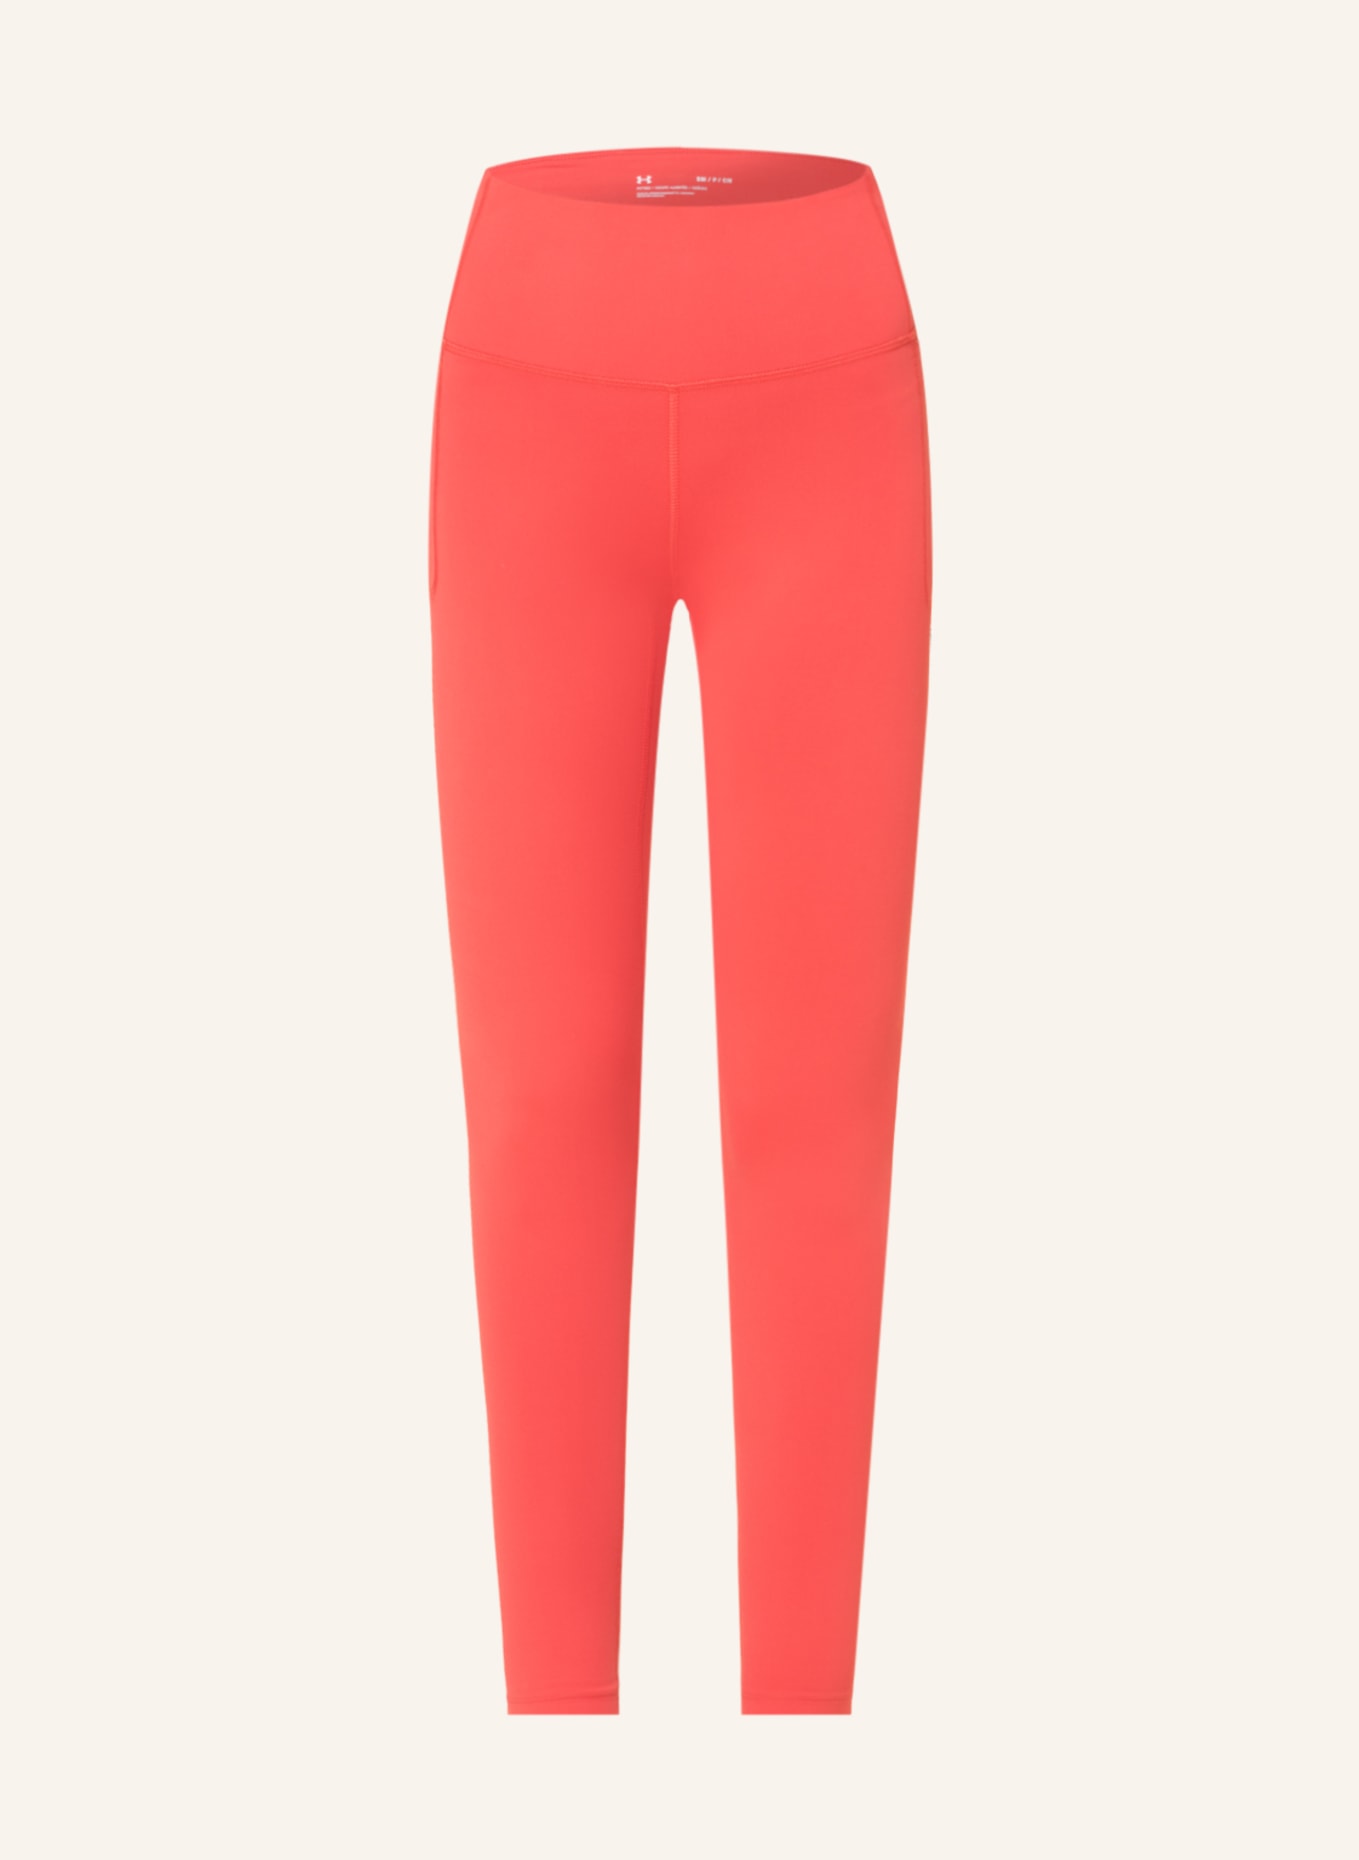 UNDER ARMOUR Tights MERIDIAN, Farbe: ROT (Bild 1)